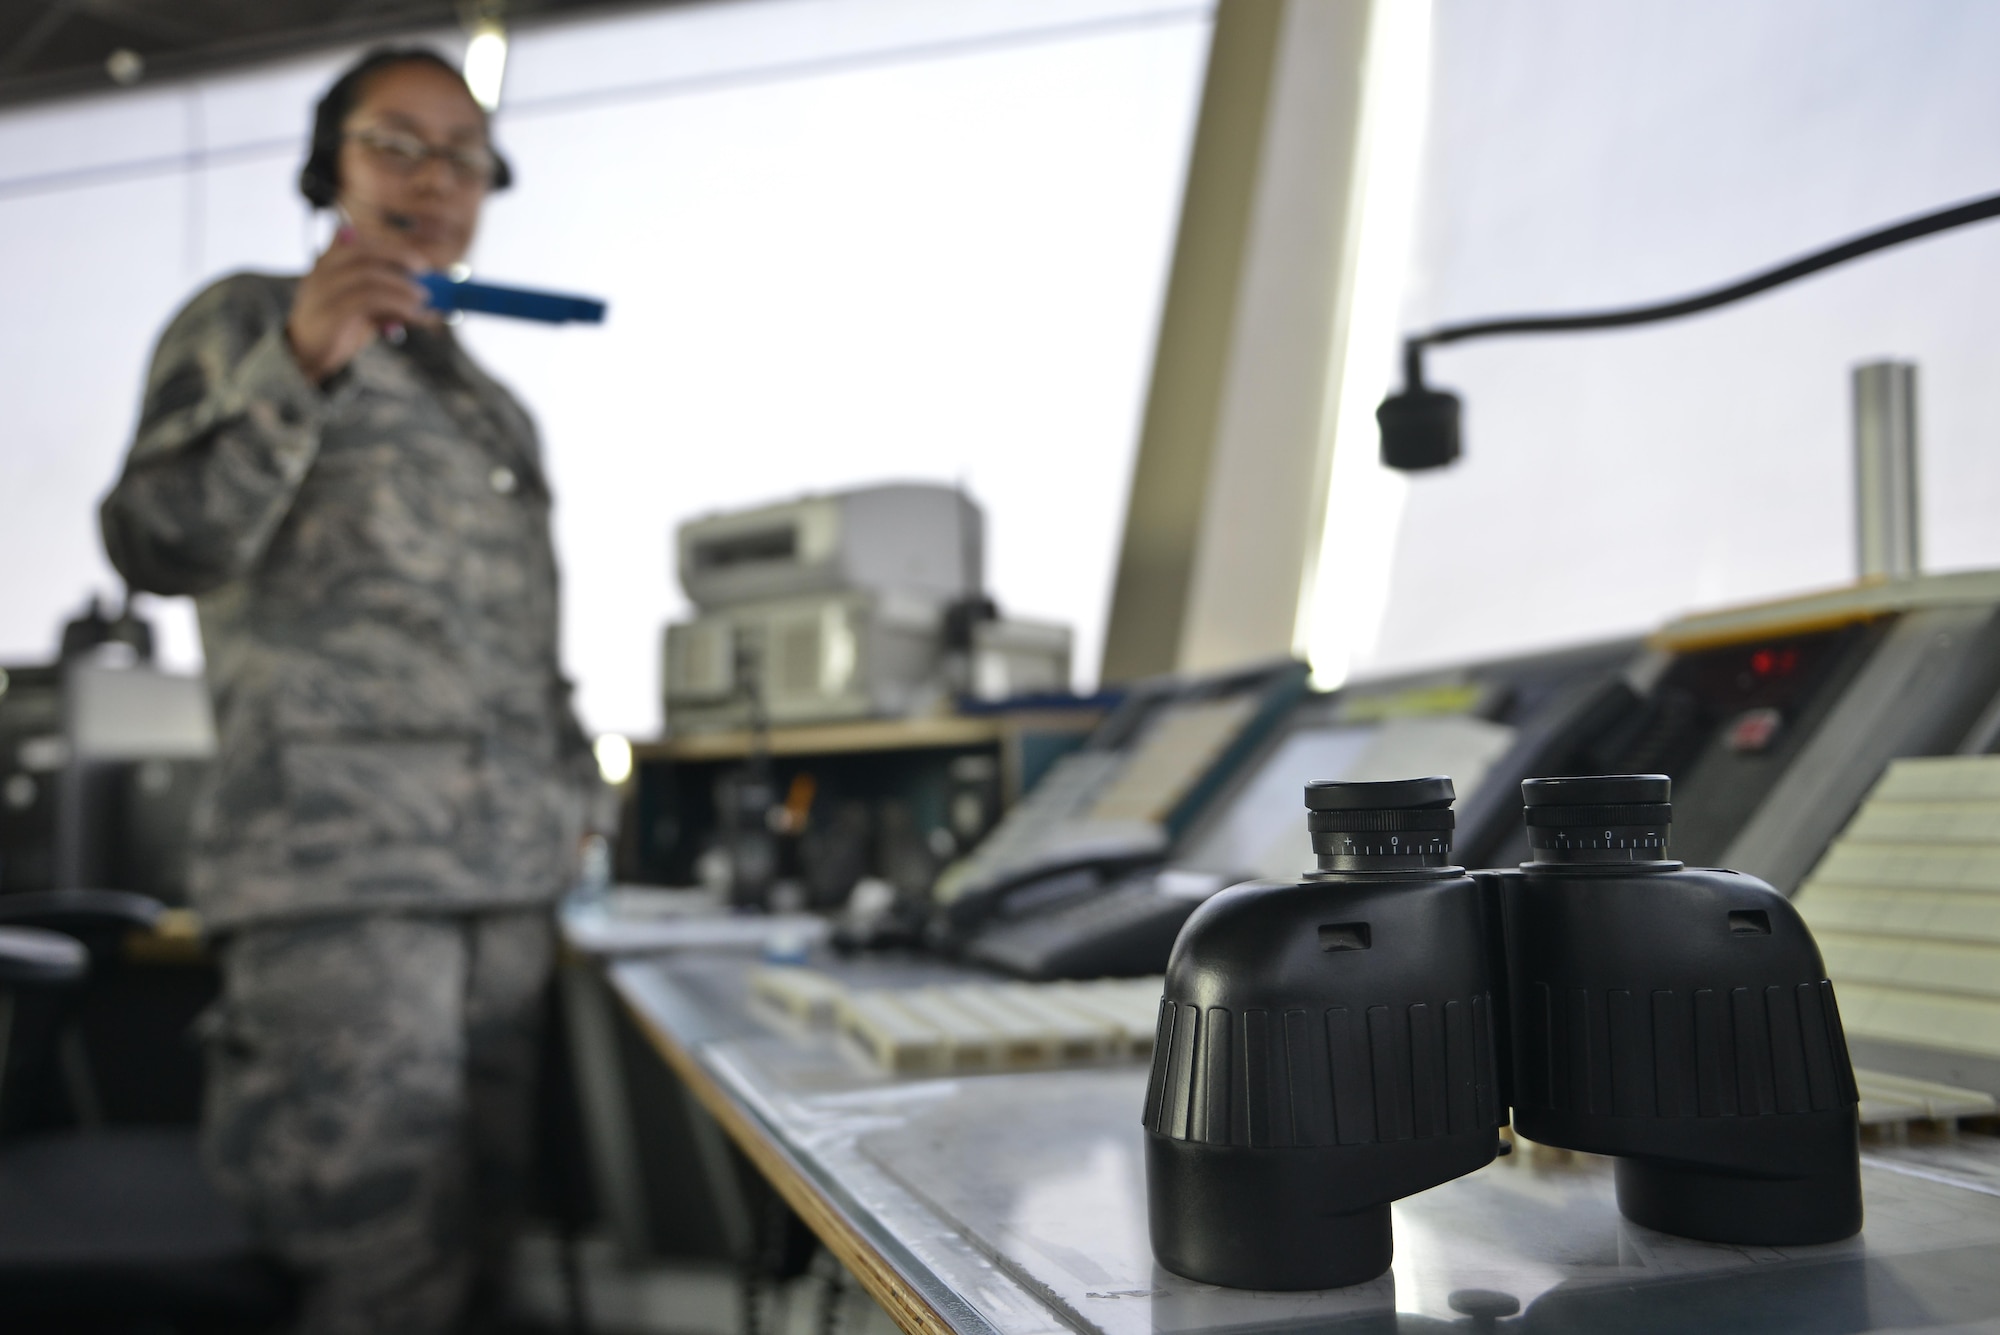 Tech. Sgt. Kelena Hendricks, 379th Expeditionary Operations Support Squadron air traffic controller, talks to aircrew preparing for departure September 2, 2015 at Al Udeid Air Base, Qatar. U.S. Air Force air traffic controllers deployed to Al Udeid Air Base remain in constant contact with coalition aircraft departing and entering the base’s airspace while working side-by-side with Qatari military ATC. (U.S. Air Force photo/Staff Sgt. Alexandre Montes)